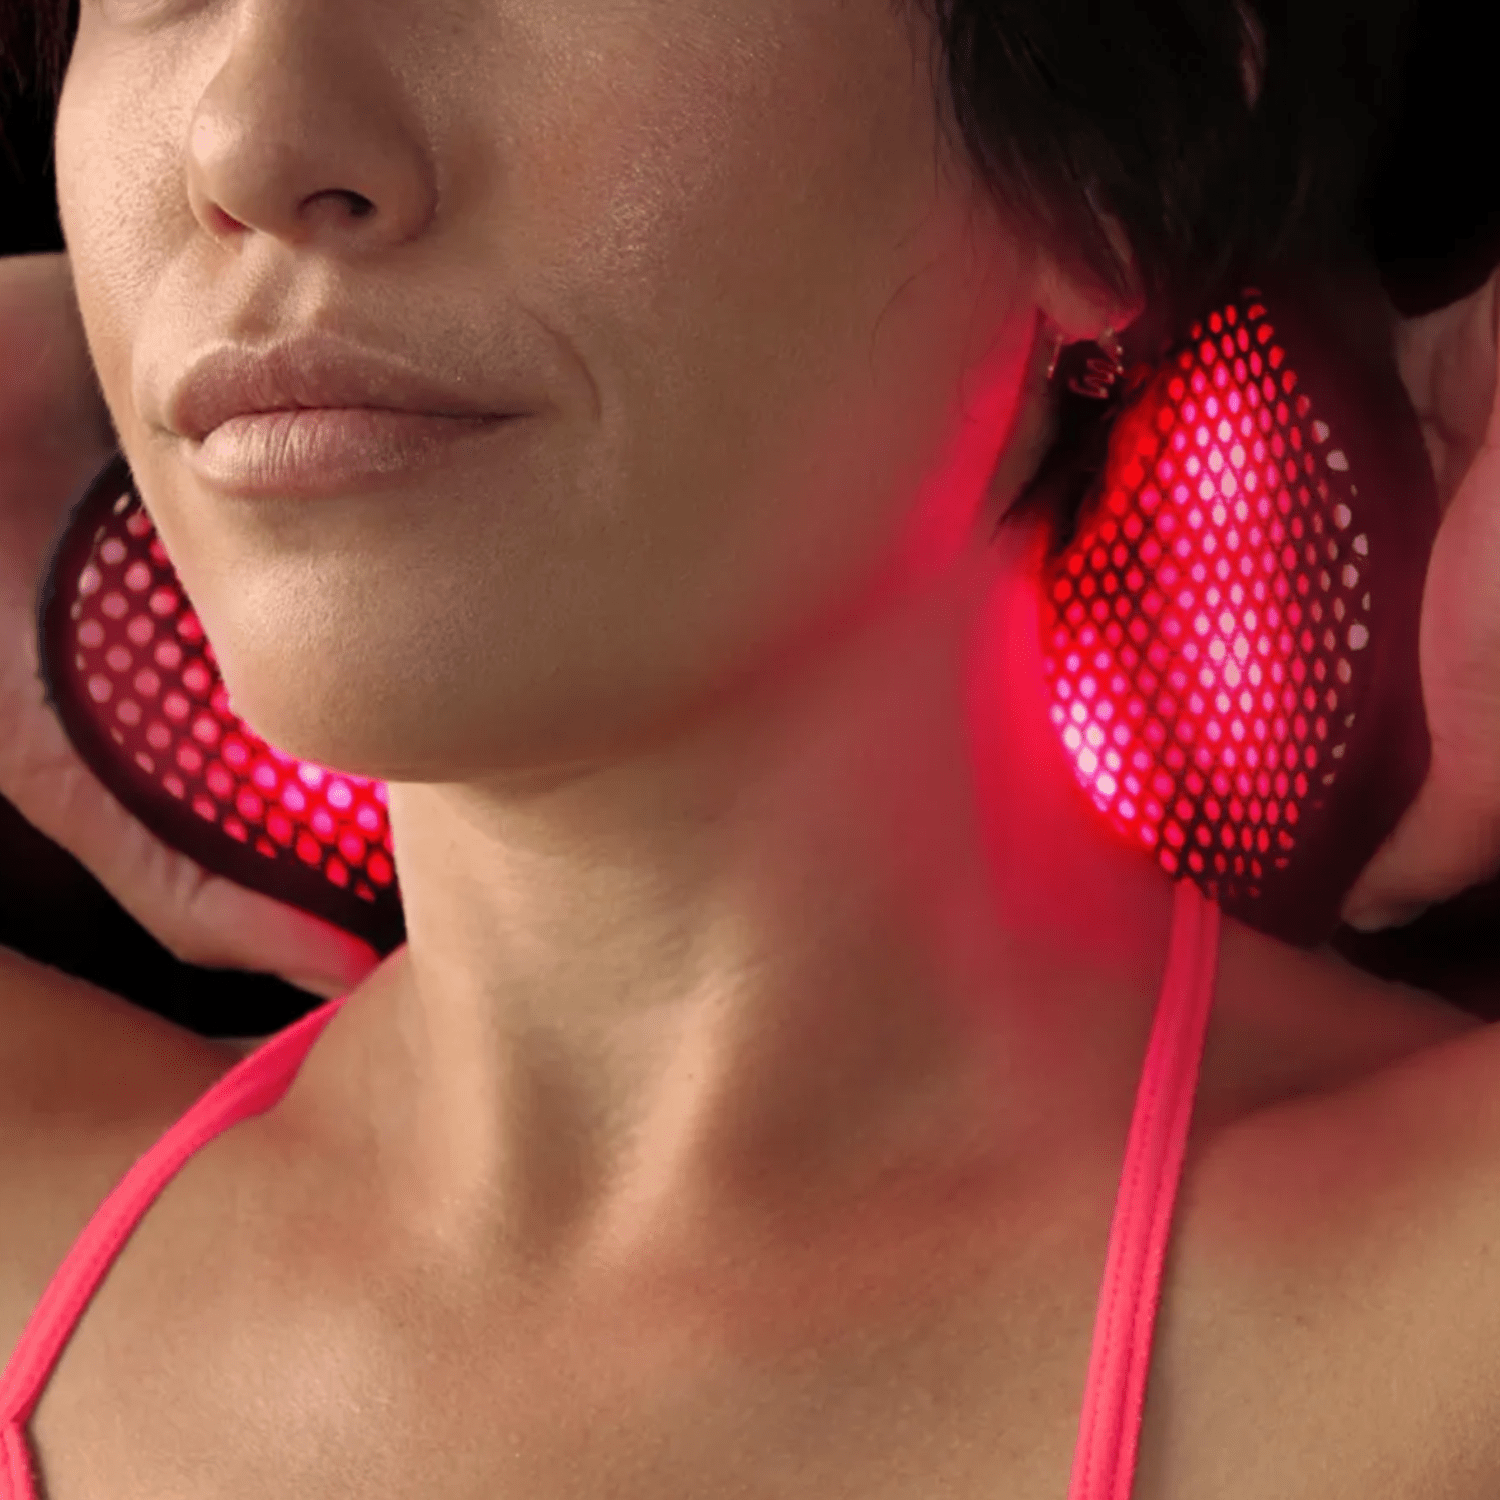 A model wears a red light device around her neck.